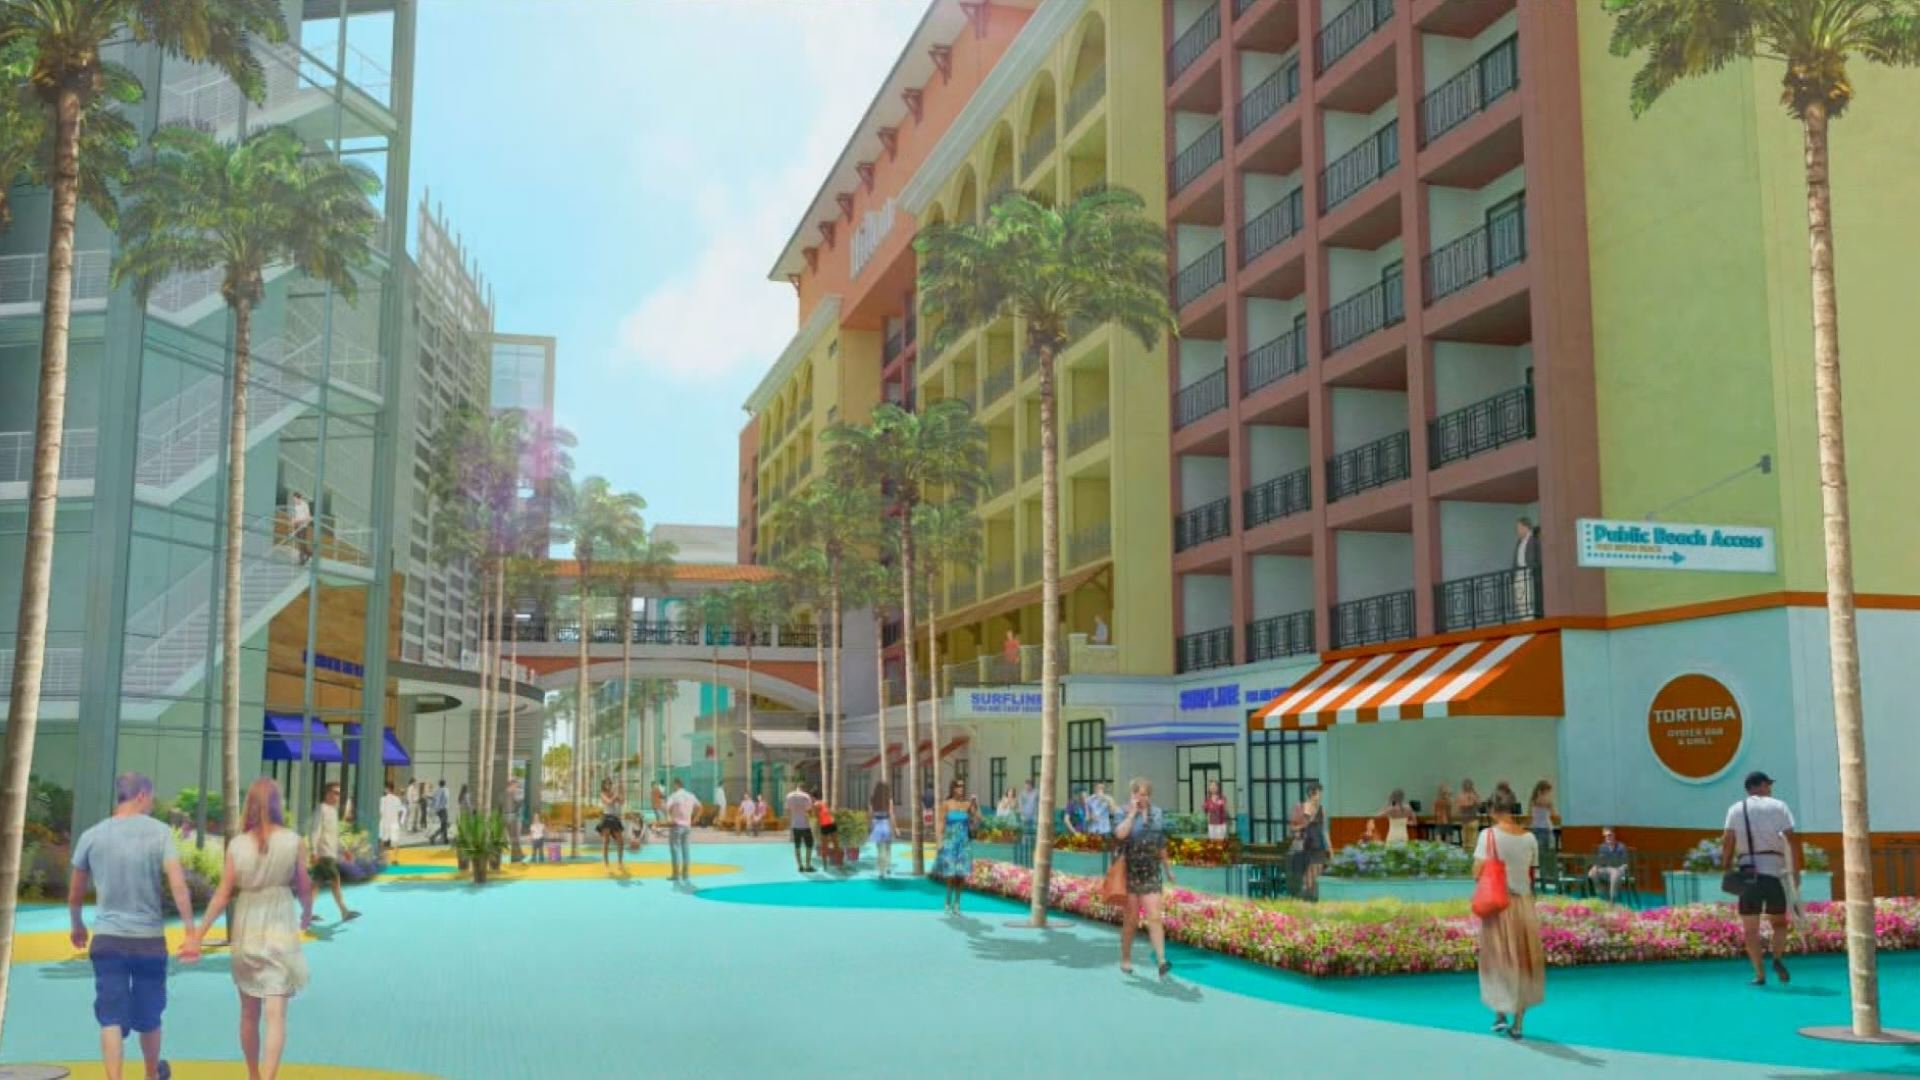  Fort Myers  Beach redevelopment plans unveiled